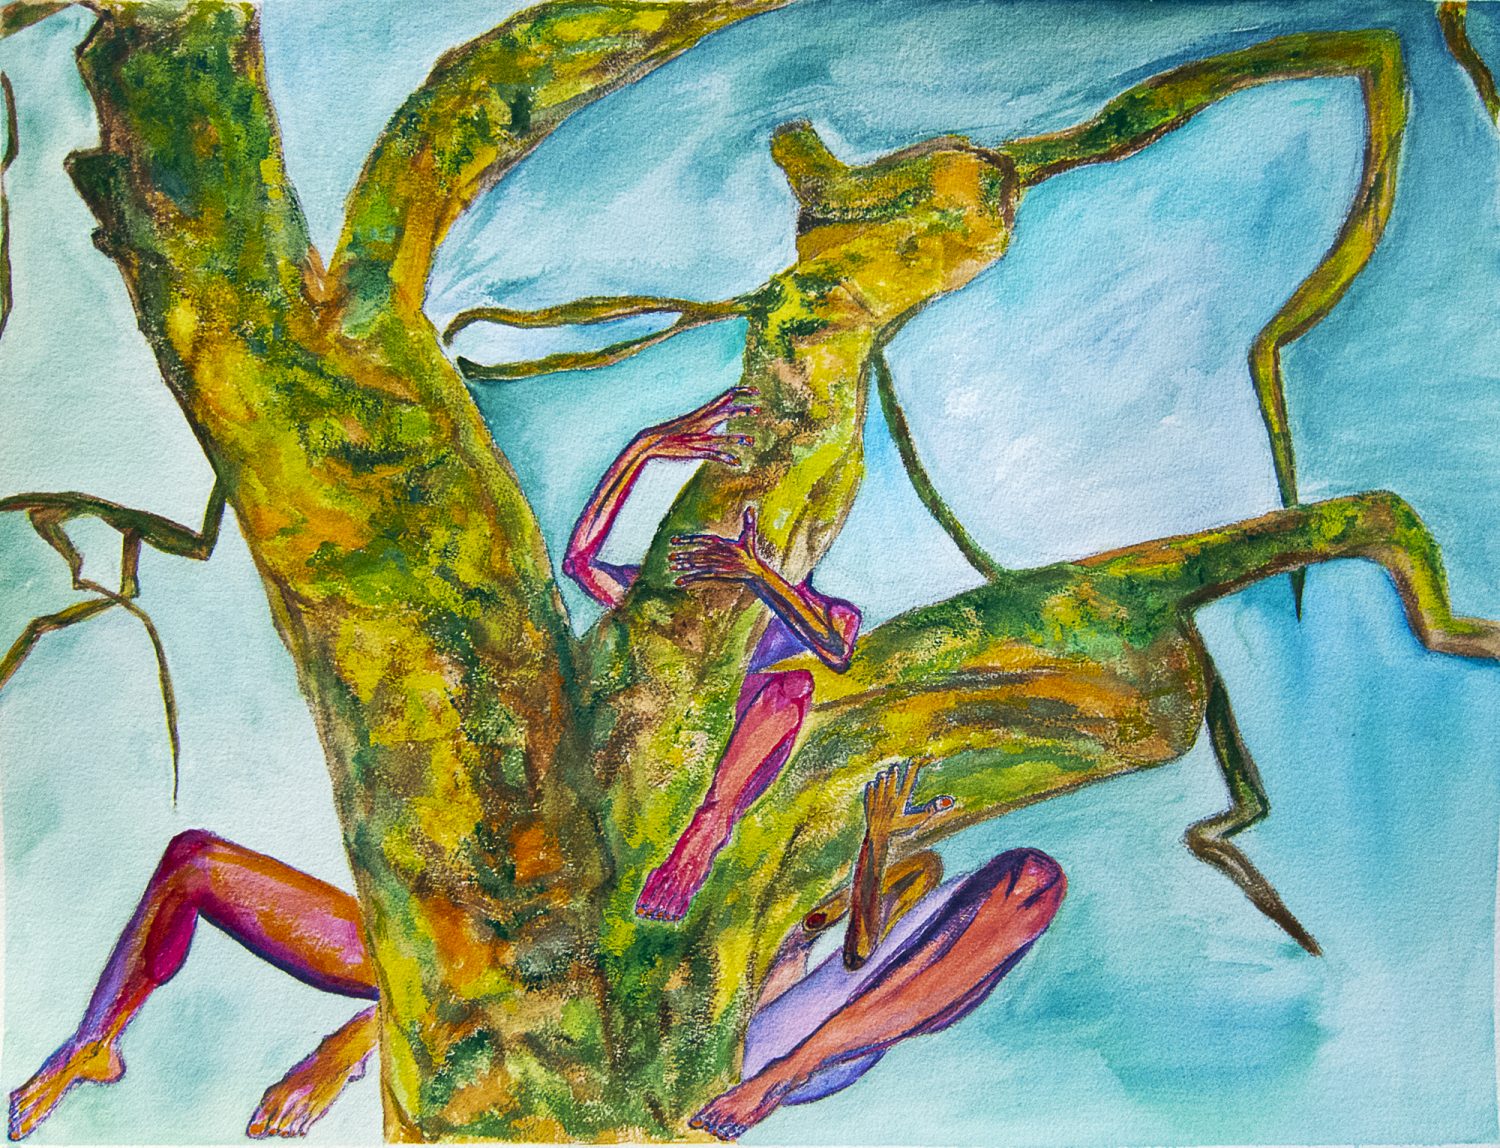 Watercolor of reddish limbs wrapped around a green tree trunk against a light blue sky.